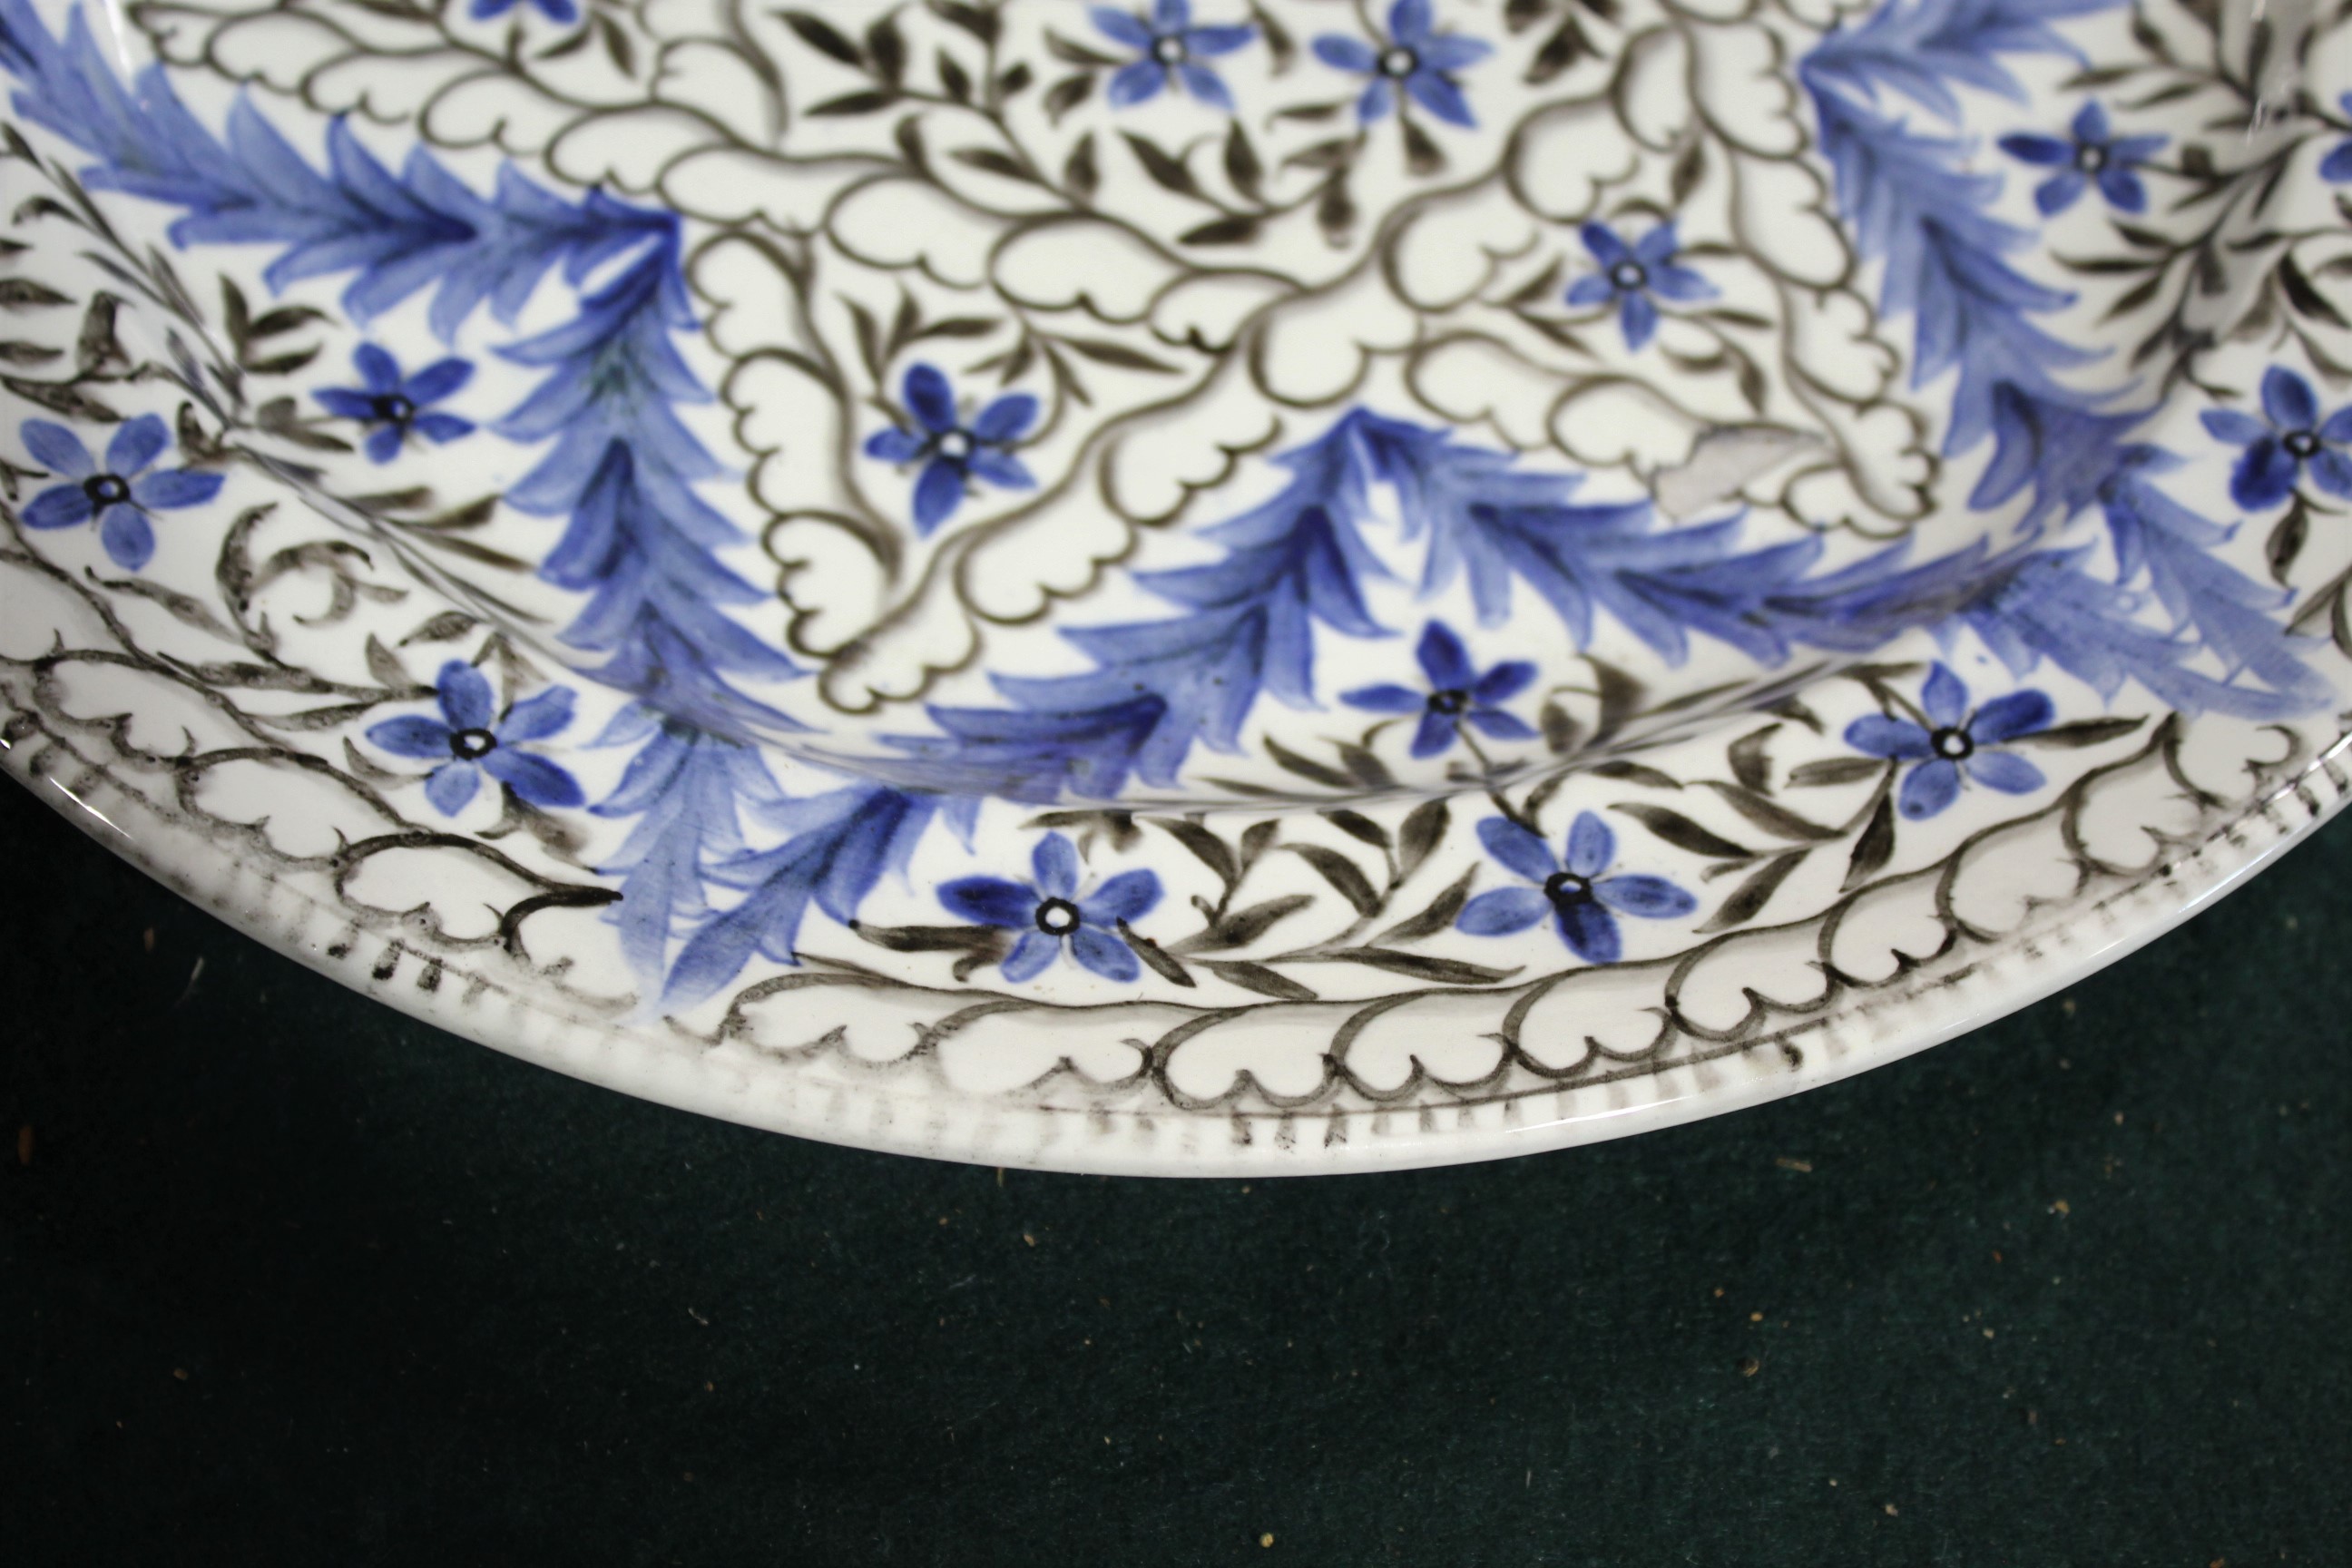 WEDGWOOD POTTERY DISH - LOUISE POWELL the large dish painted with a star shaped motif in the centre, - Image 10 of 11